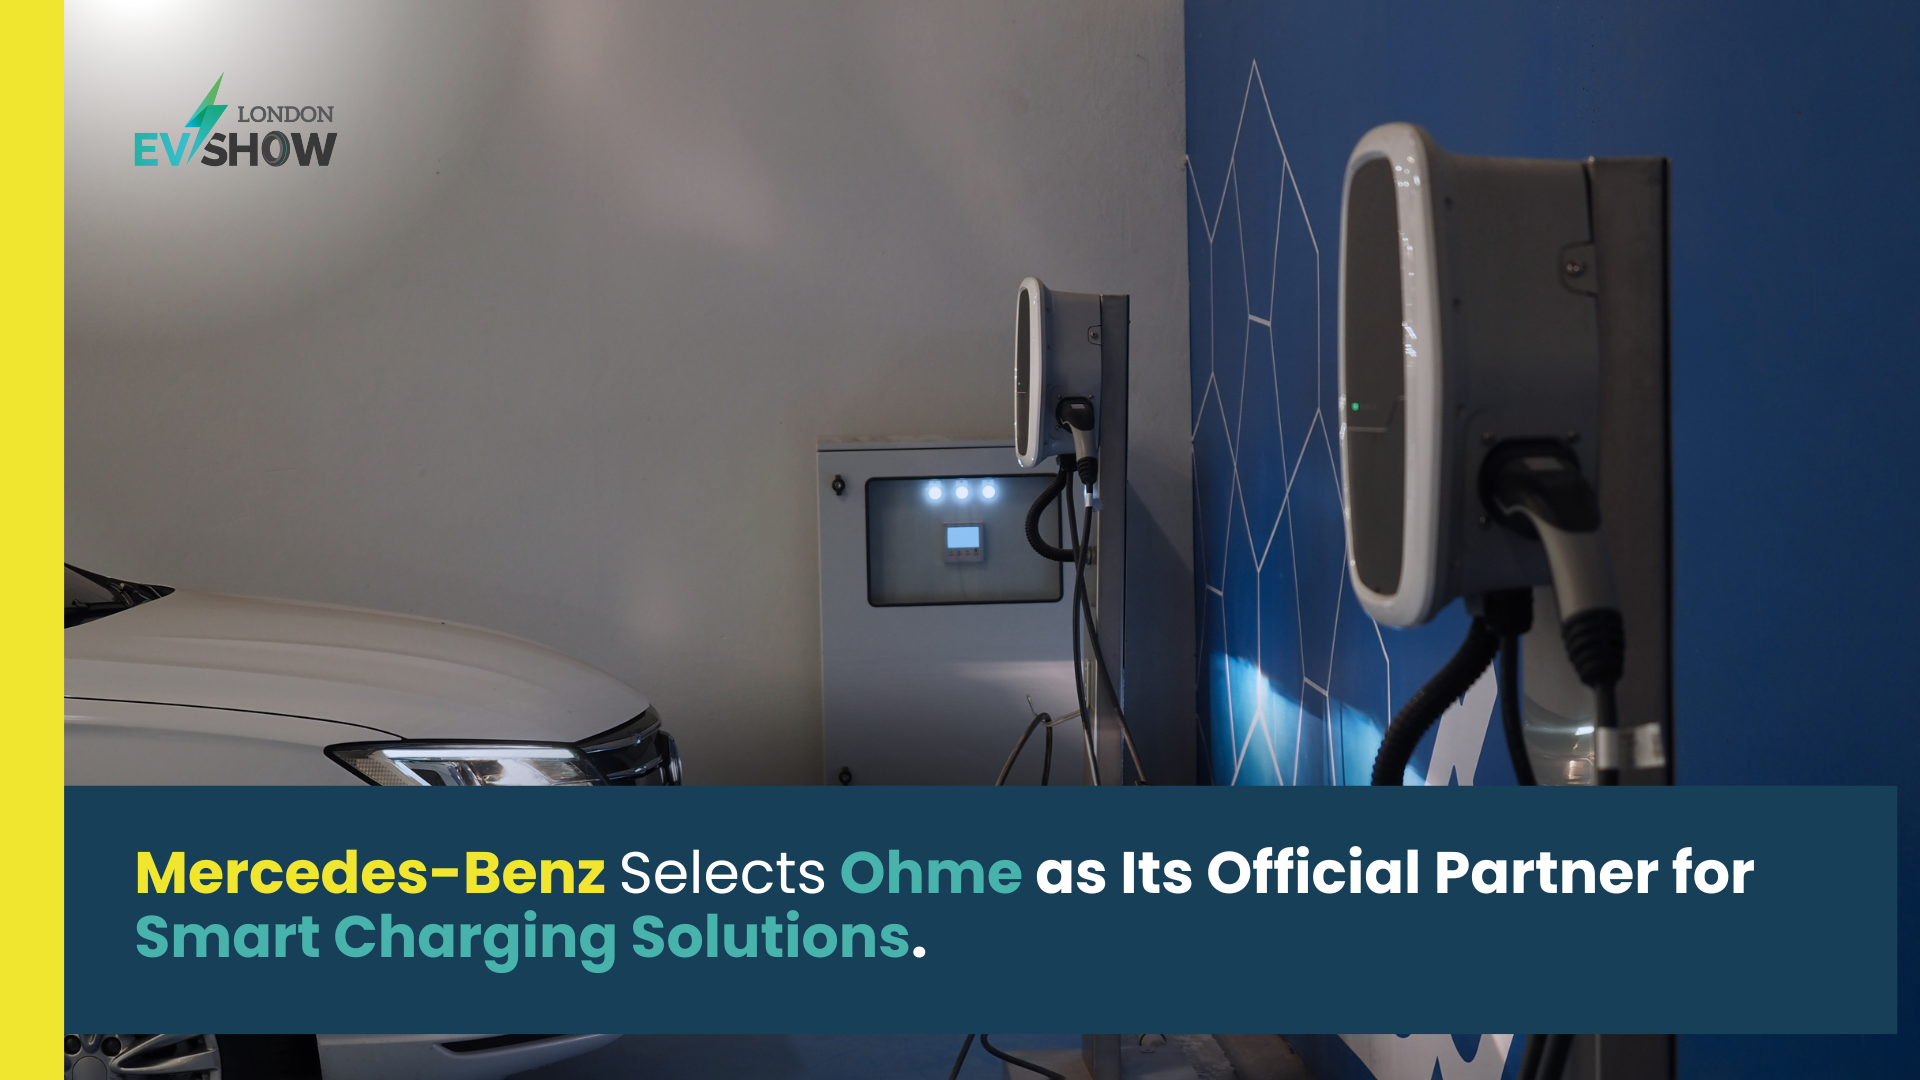 Mercedes-Benz Selects Ohme as Its Official Partner for Smart Charging Solutions.